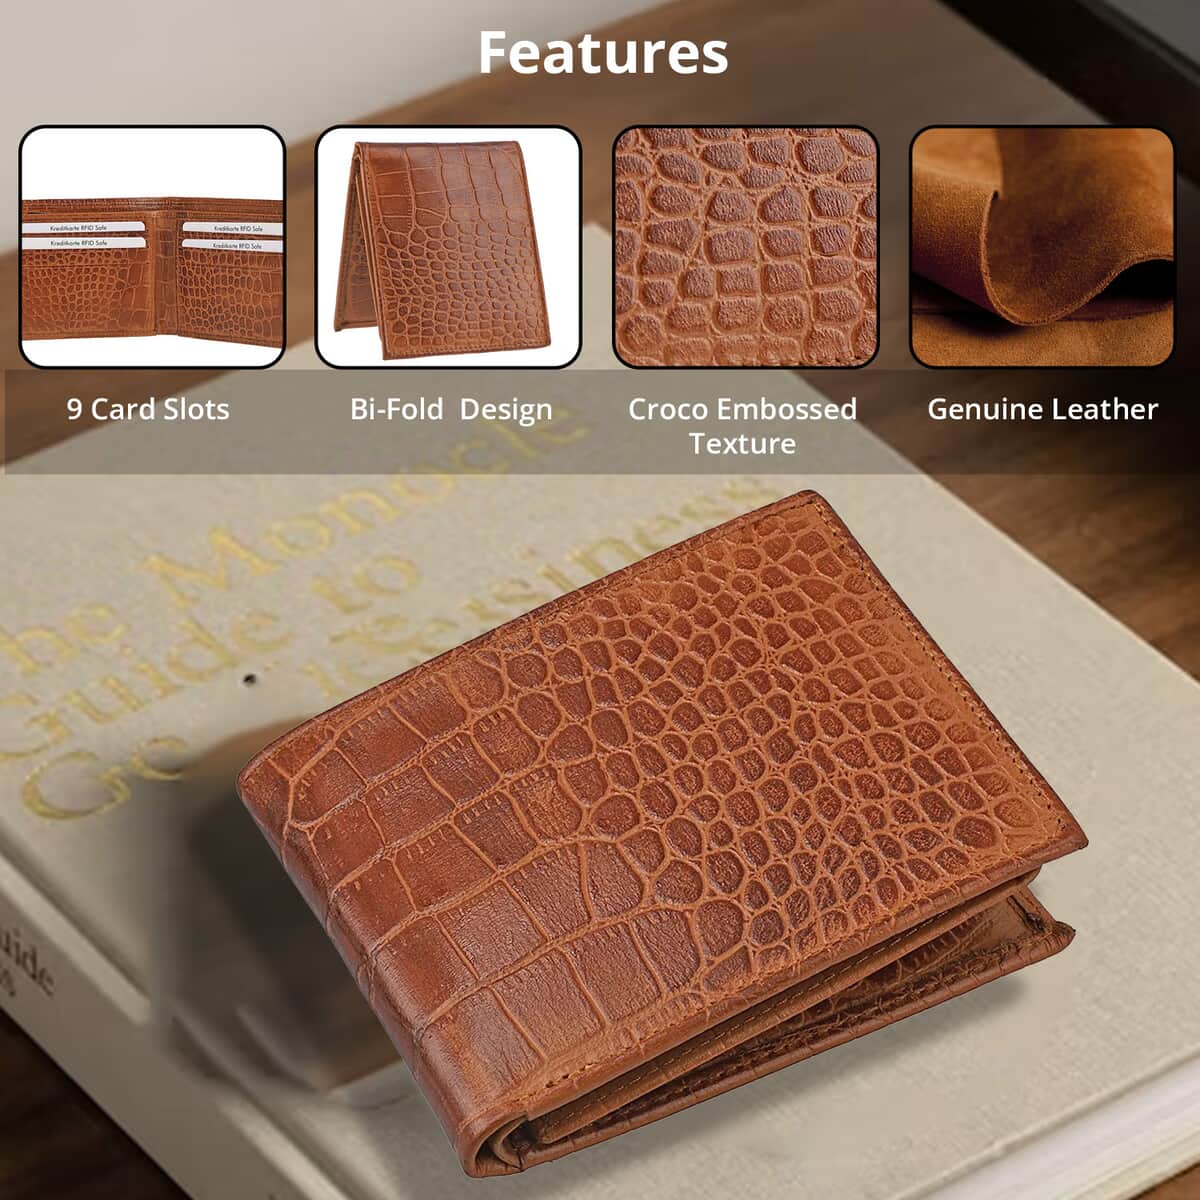 UNION CODE Tan Croco Embossed Genuine Leather RFID Bi Fold Men's Wallet | Leather Card Holder Travel Wallet | Leather Purse for Men image number 3